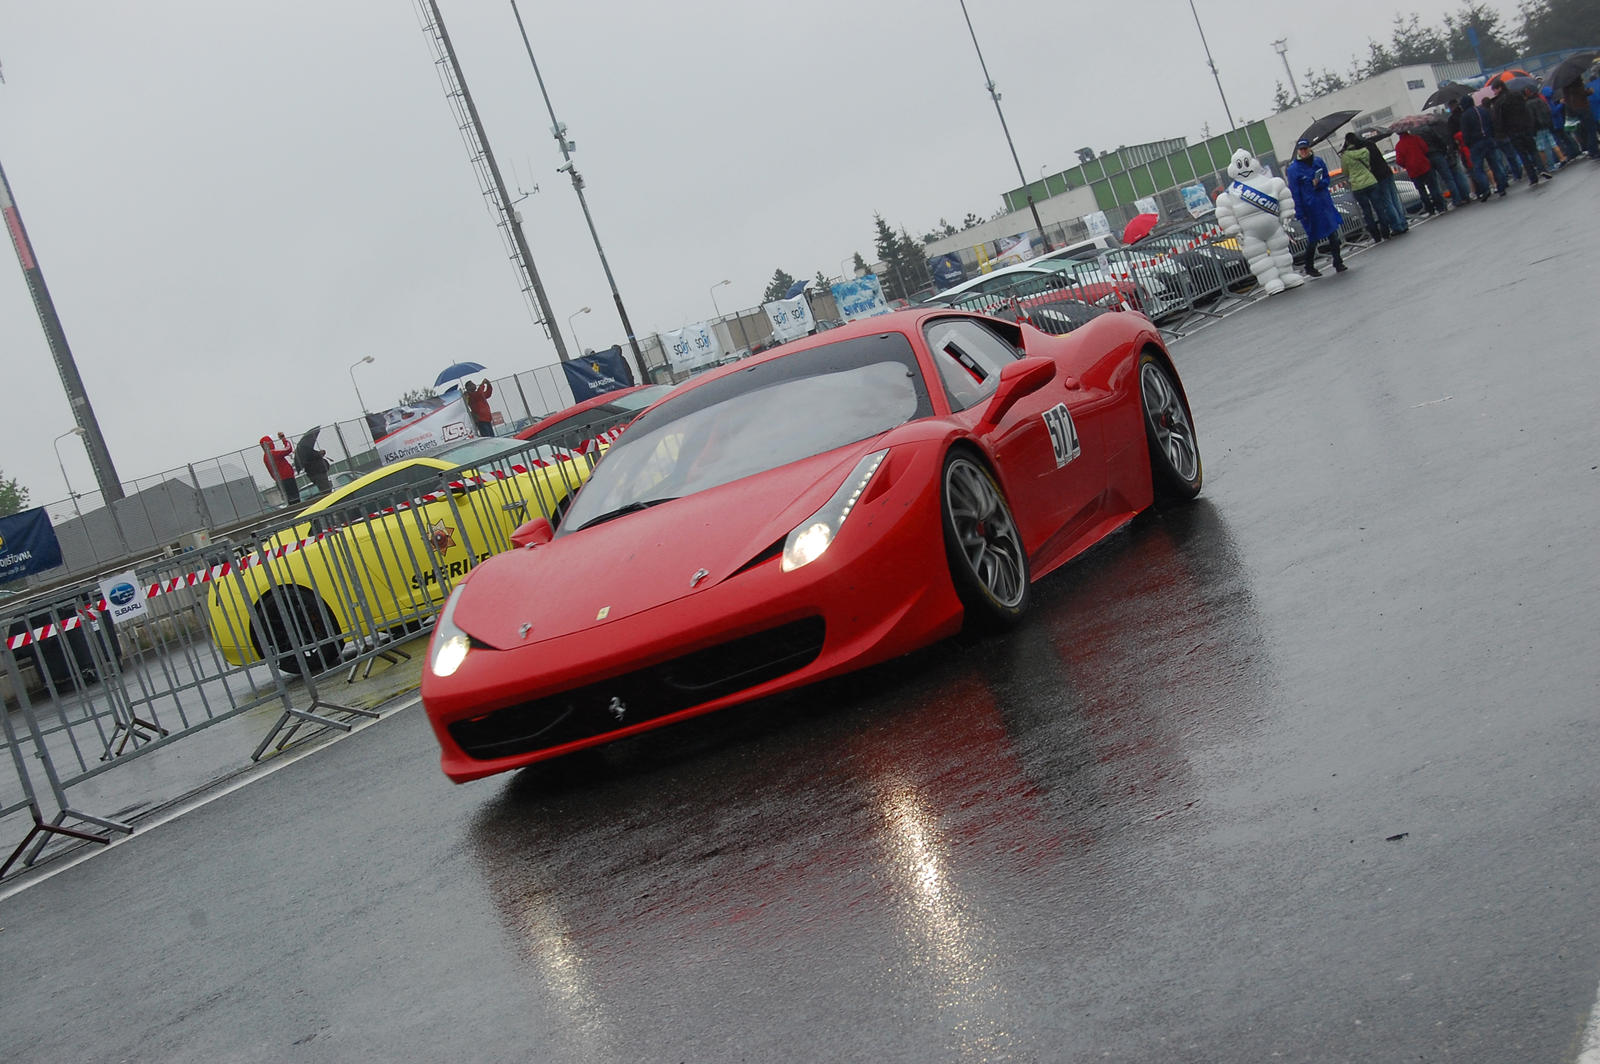 458 going for a ride